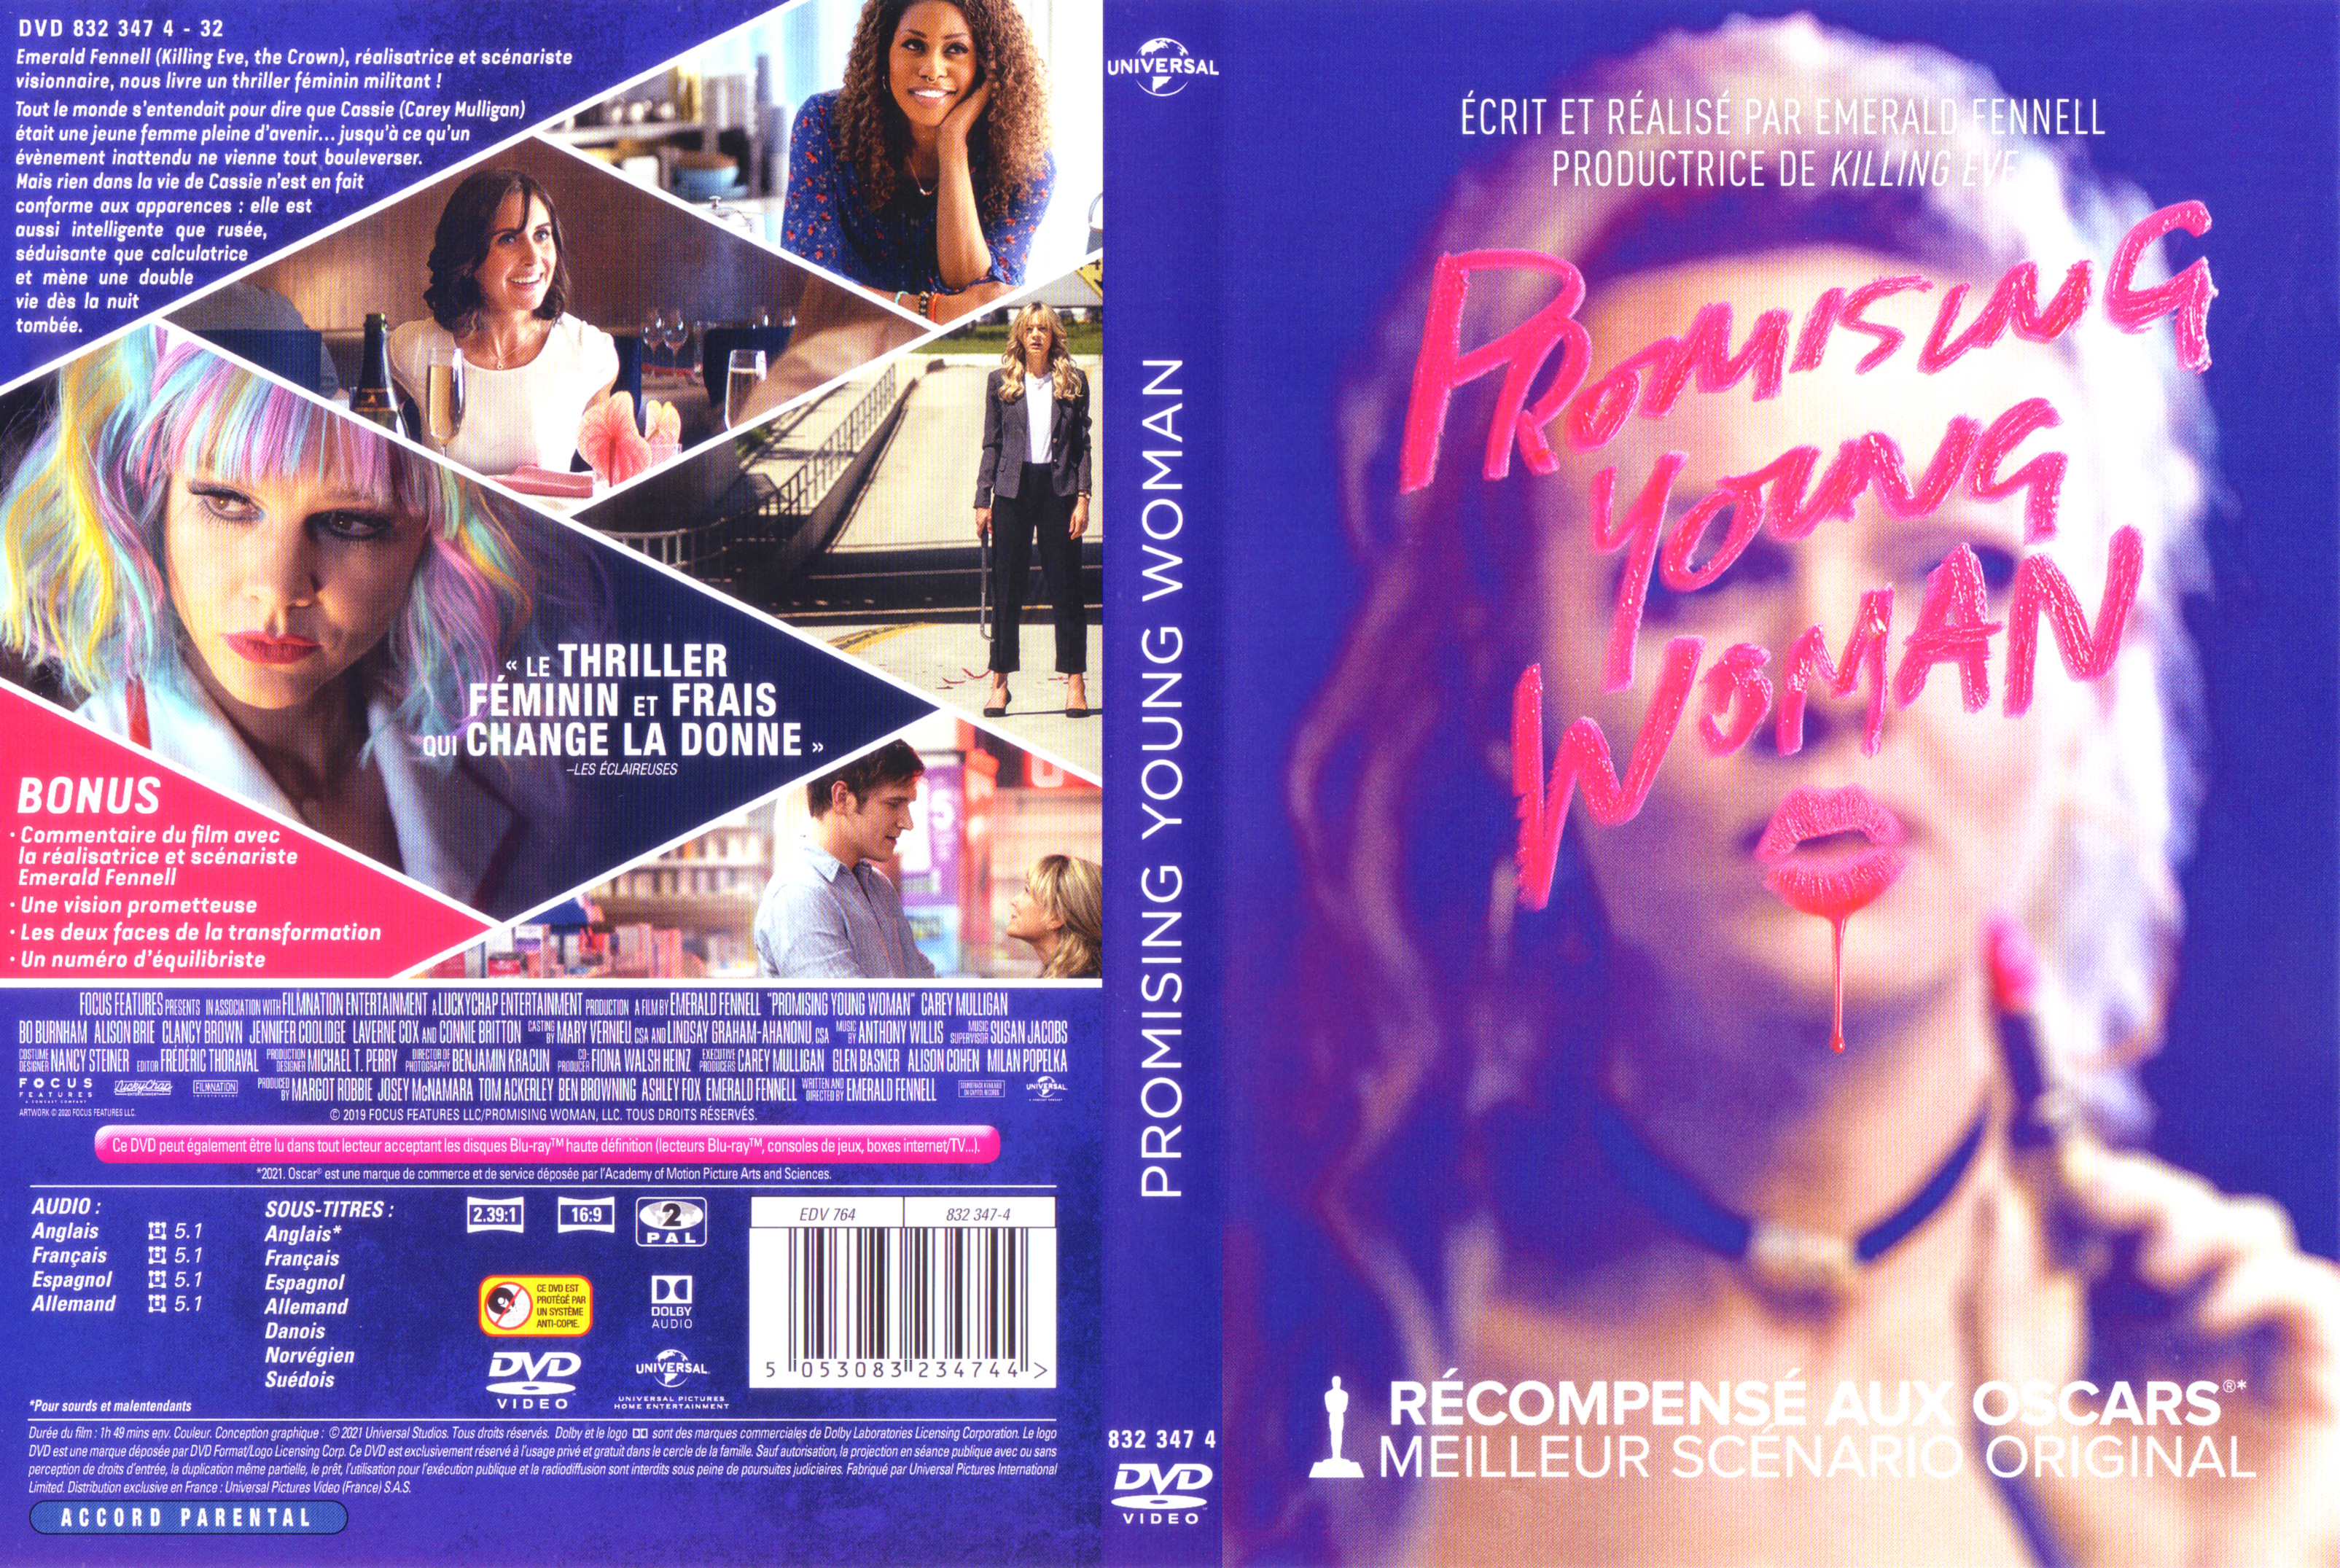 Jaquette DVD Promising young woman